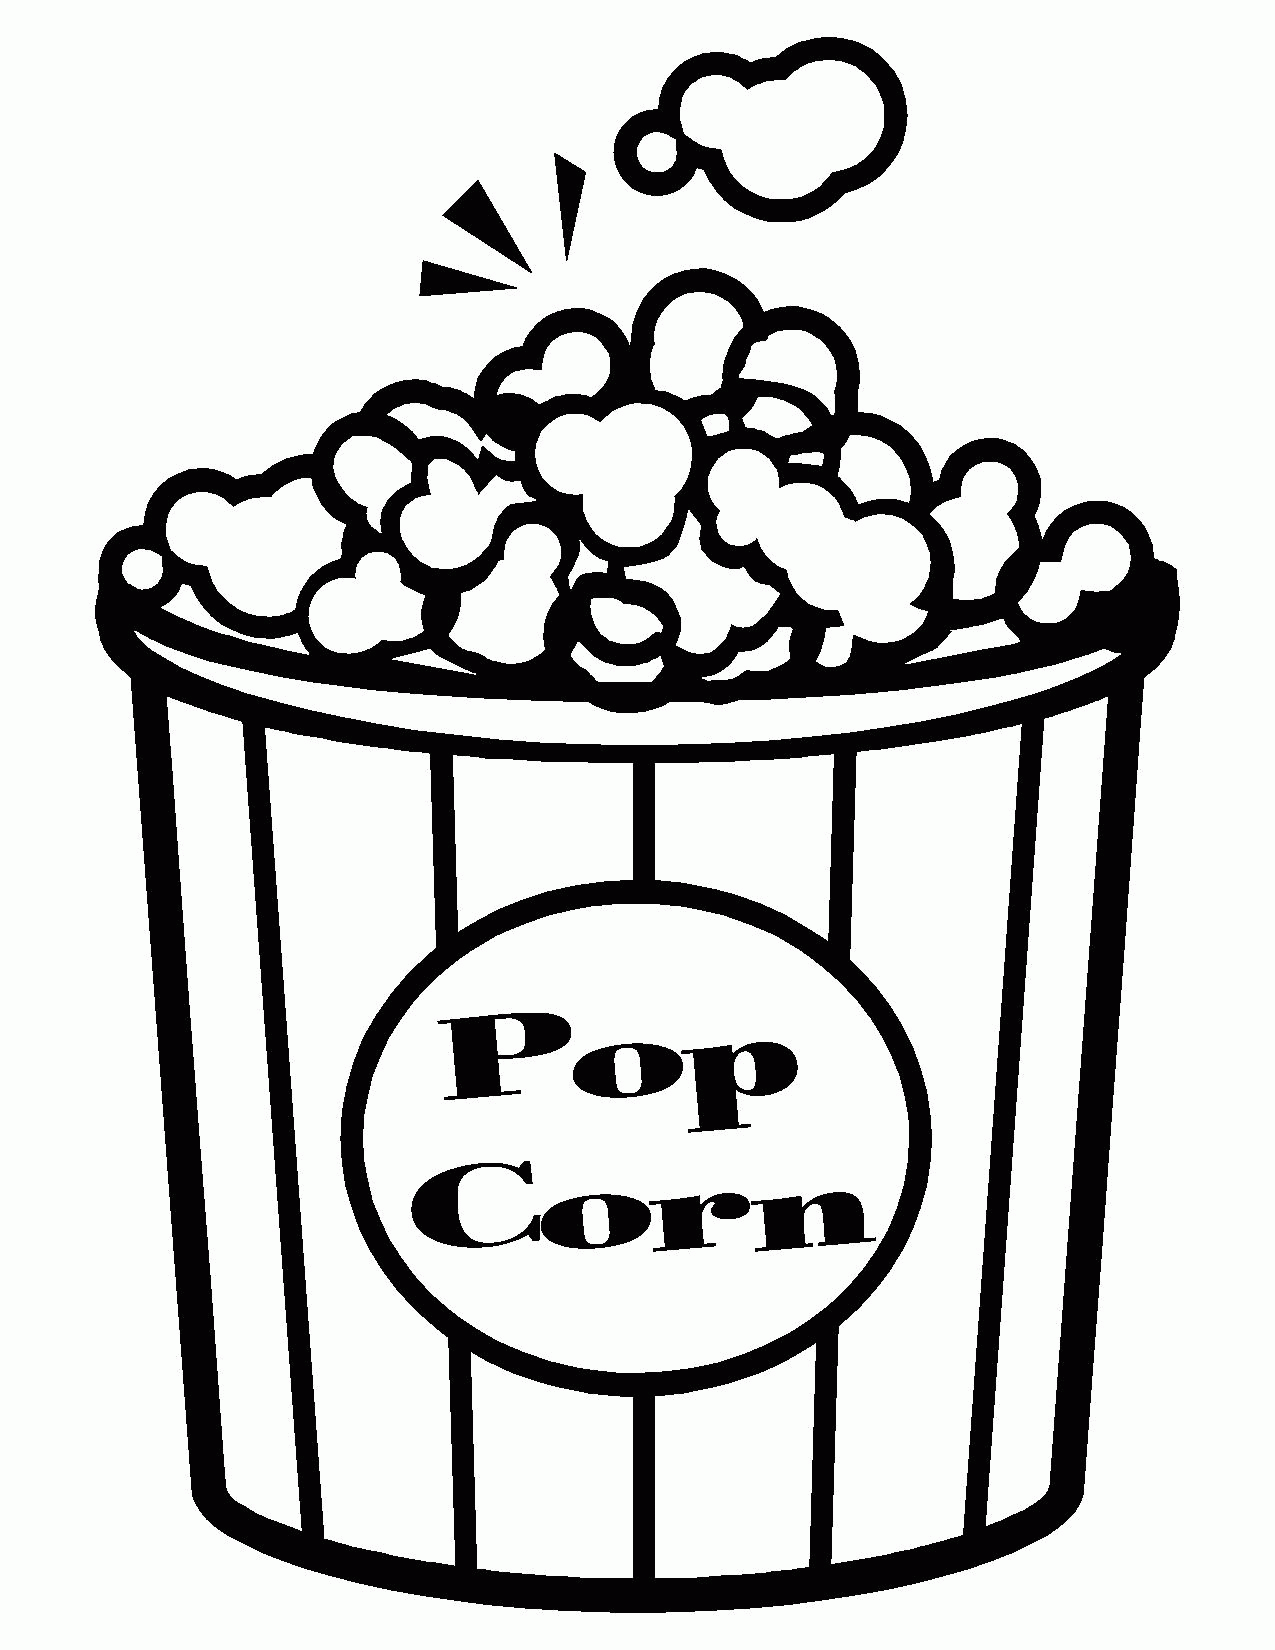 National Popcorn Day Coloring Page